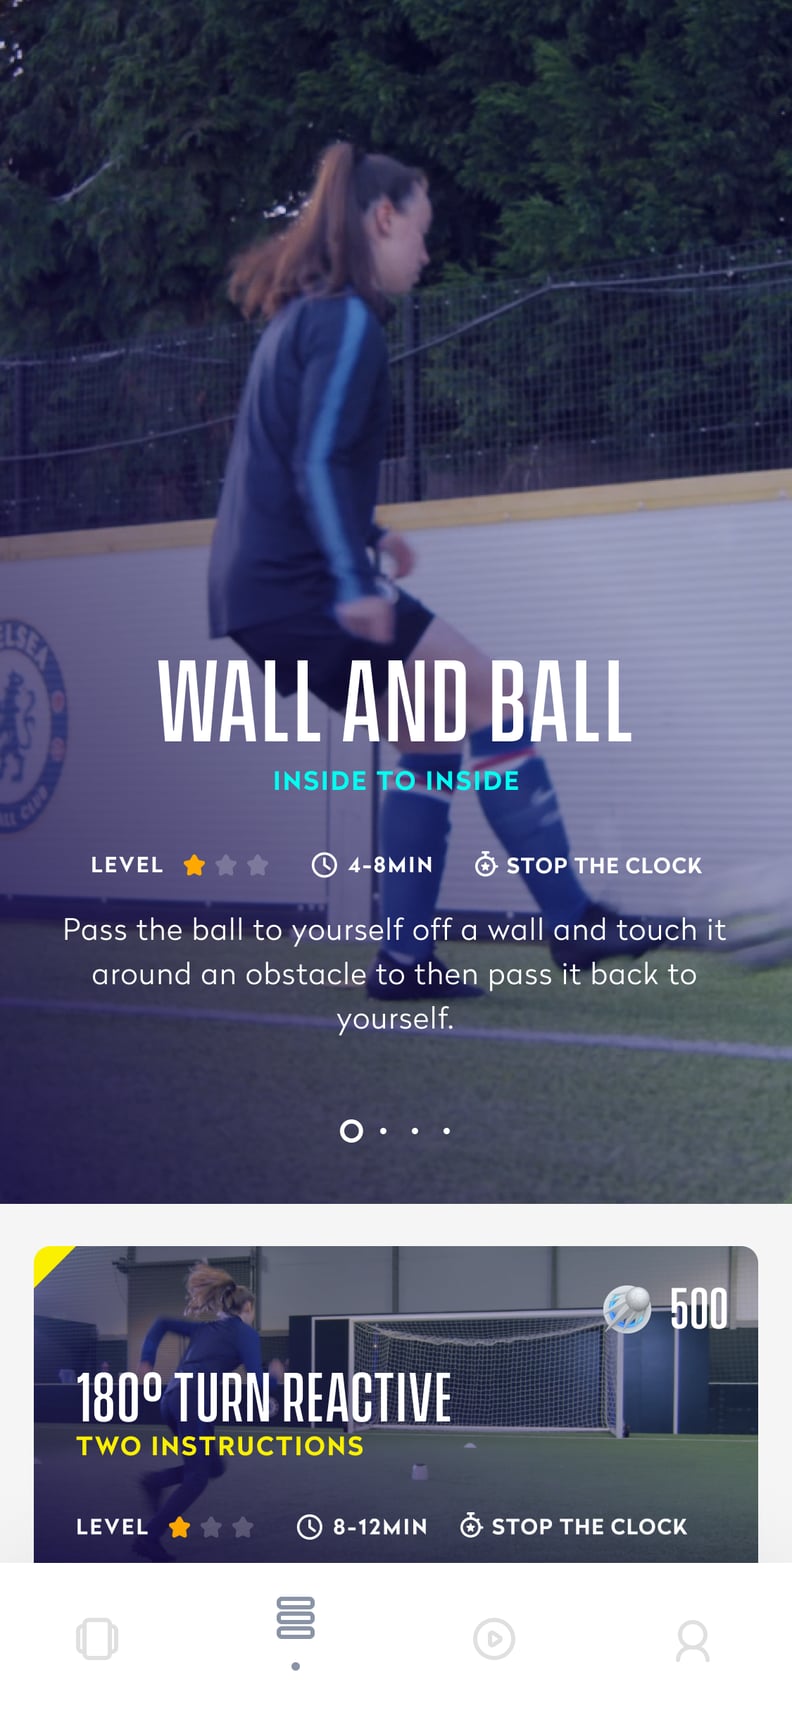 Do You Need Soccer Experience to Use the Perfect Play App?